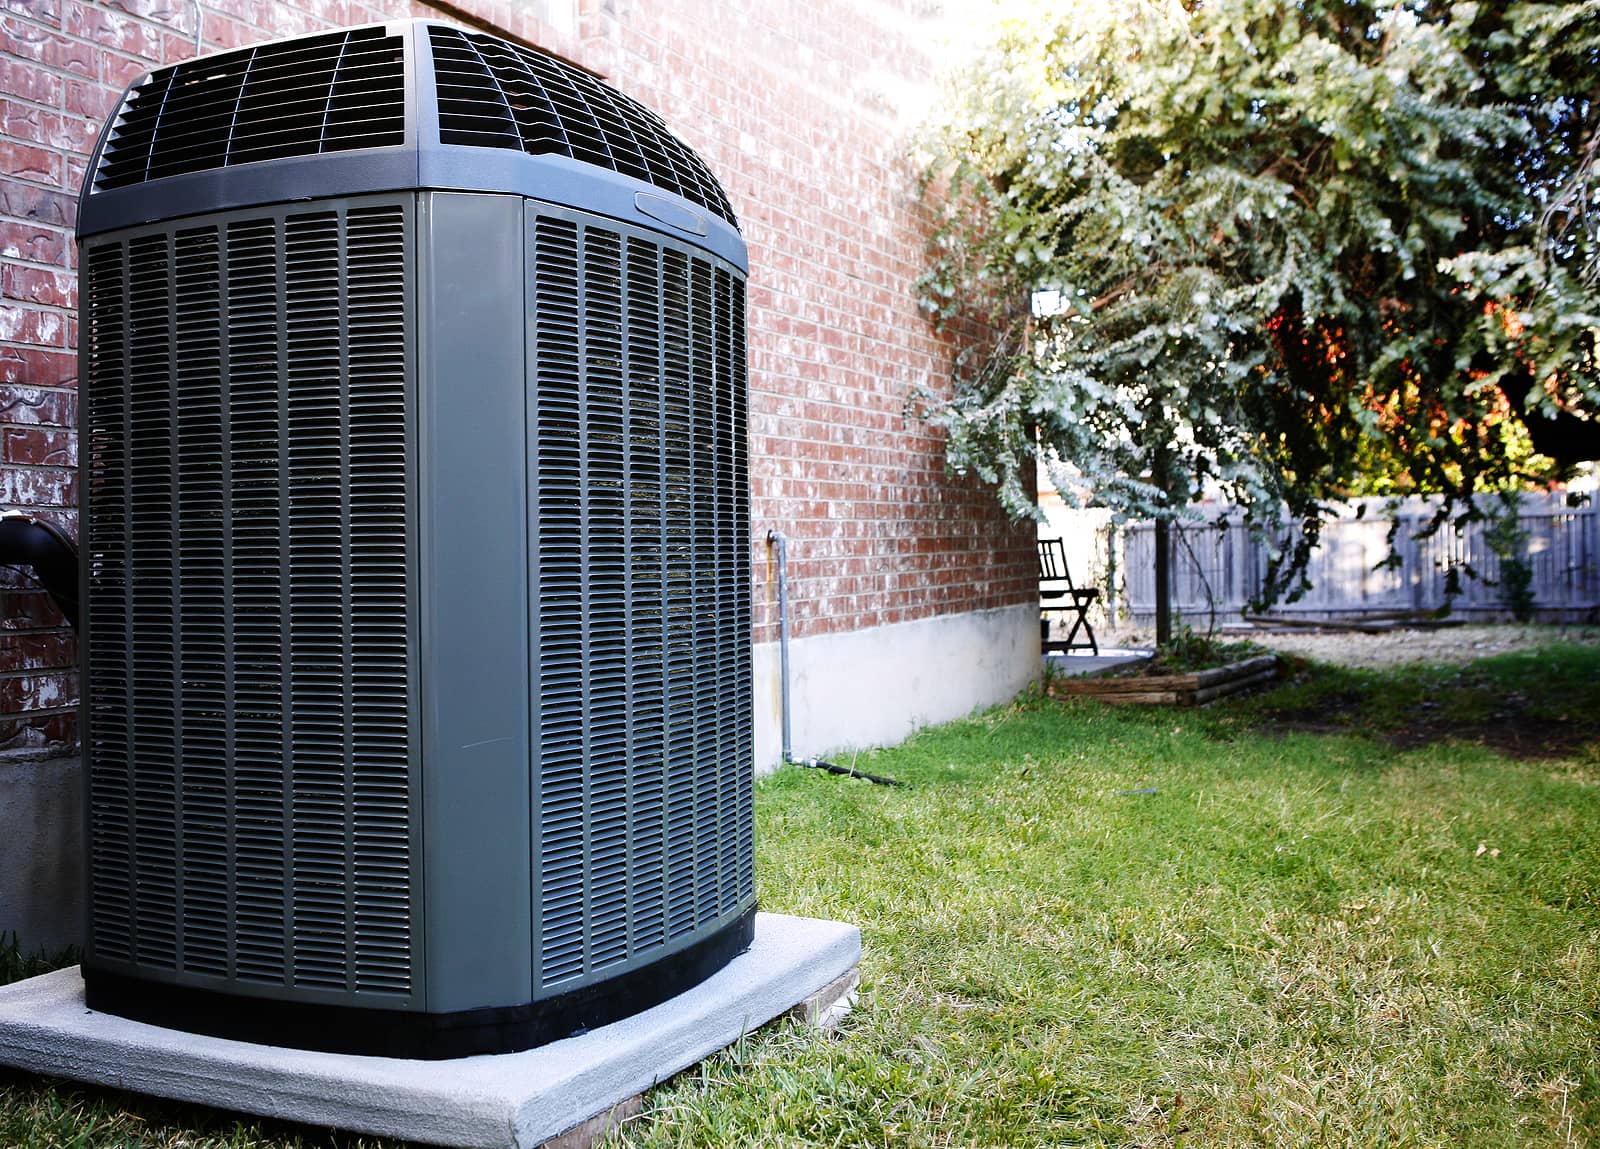 Does a Home Insurance Policy Cover AC Units